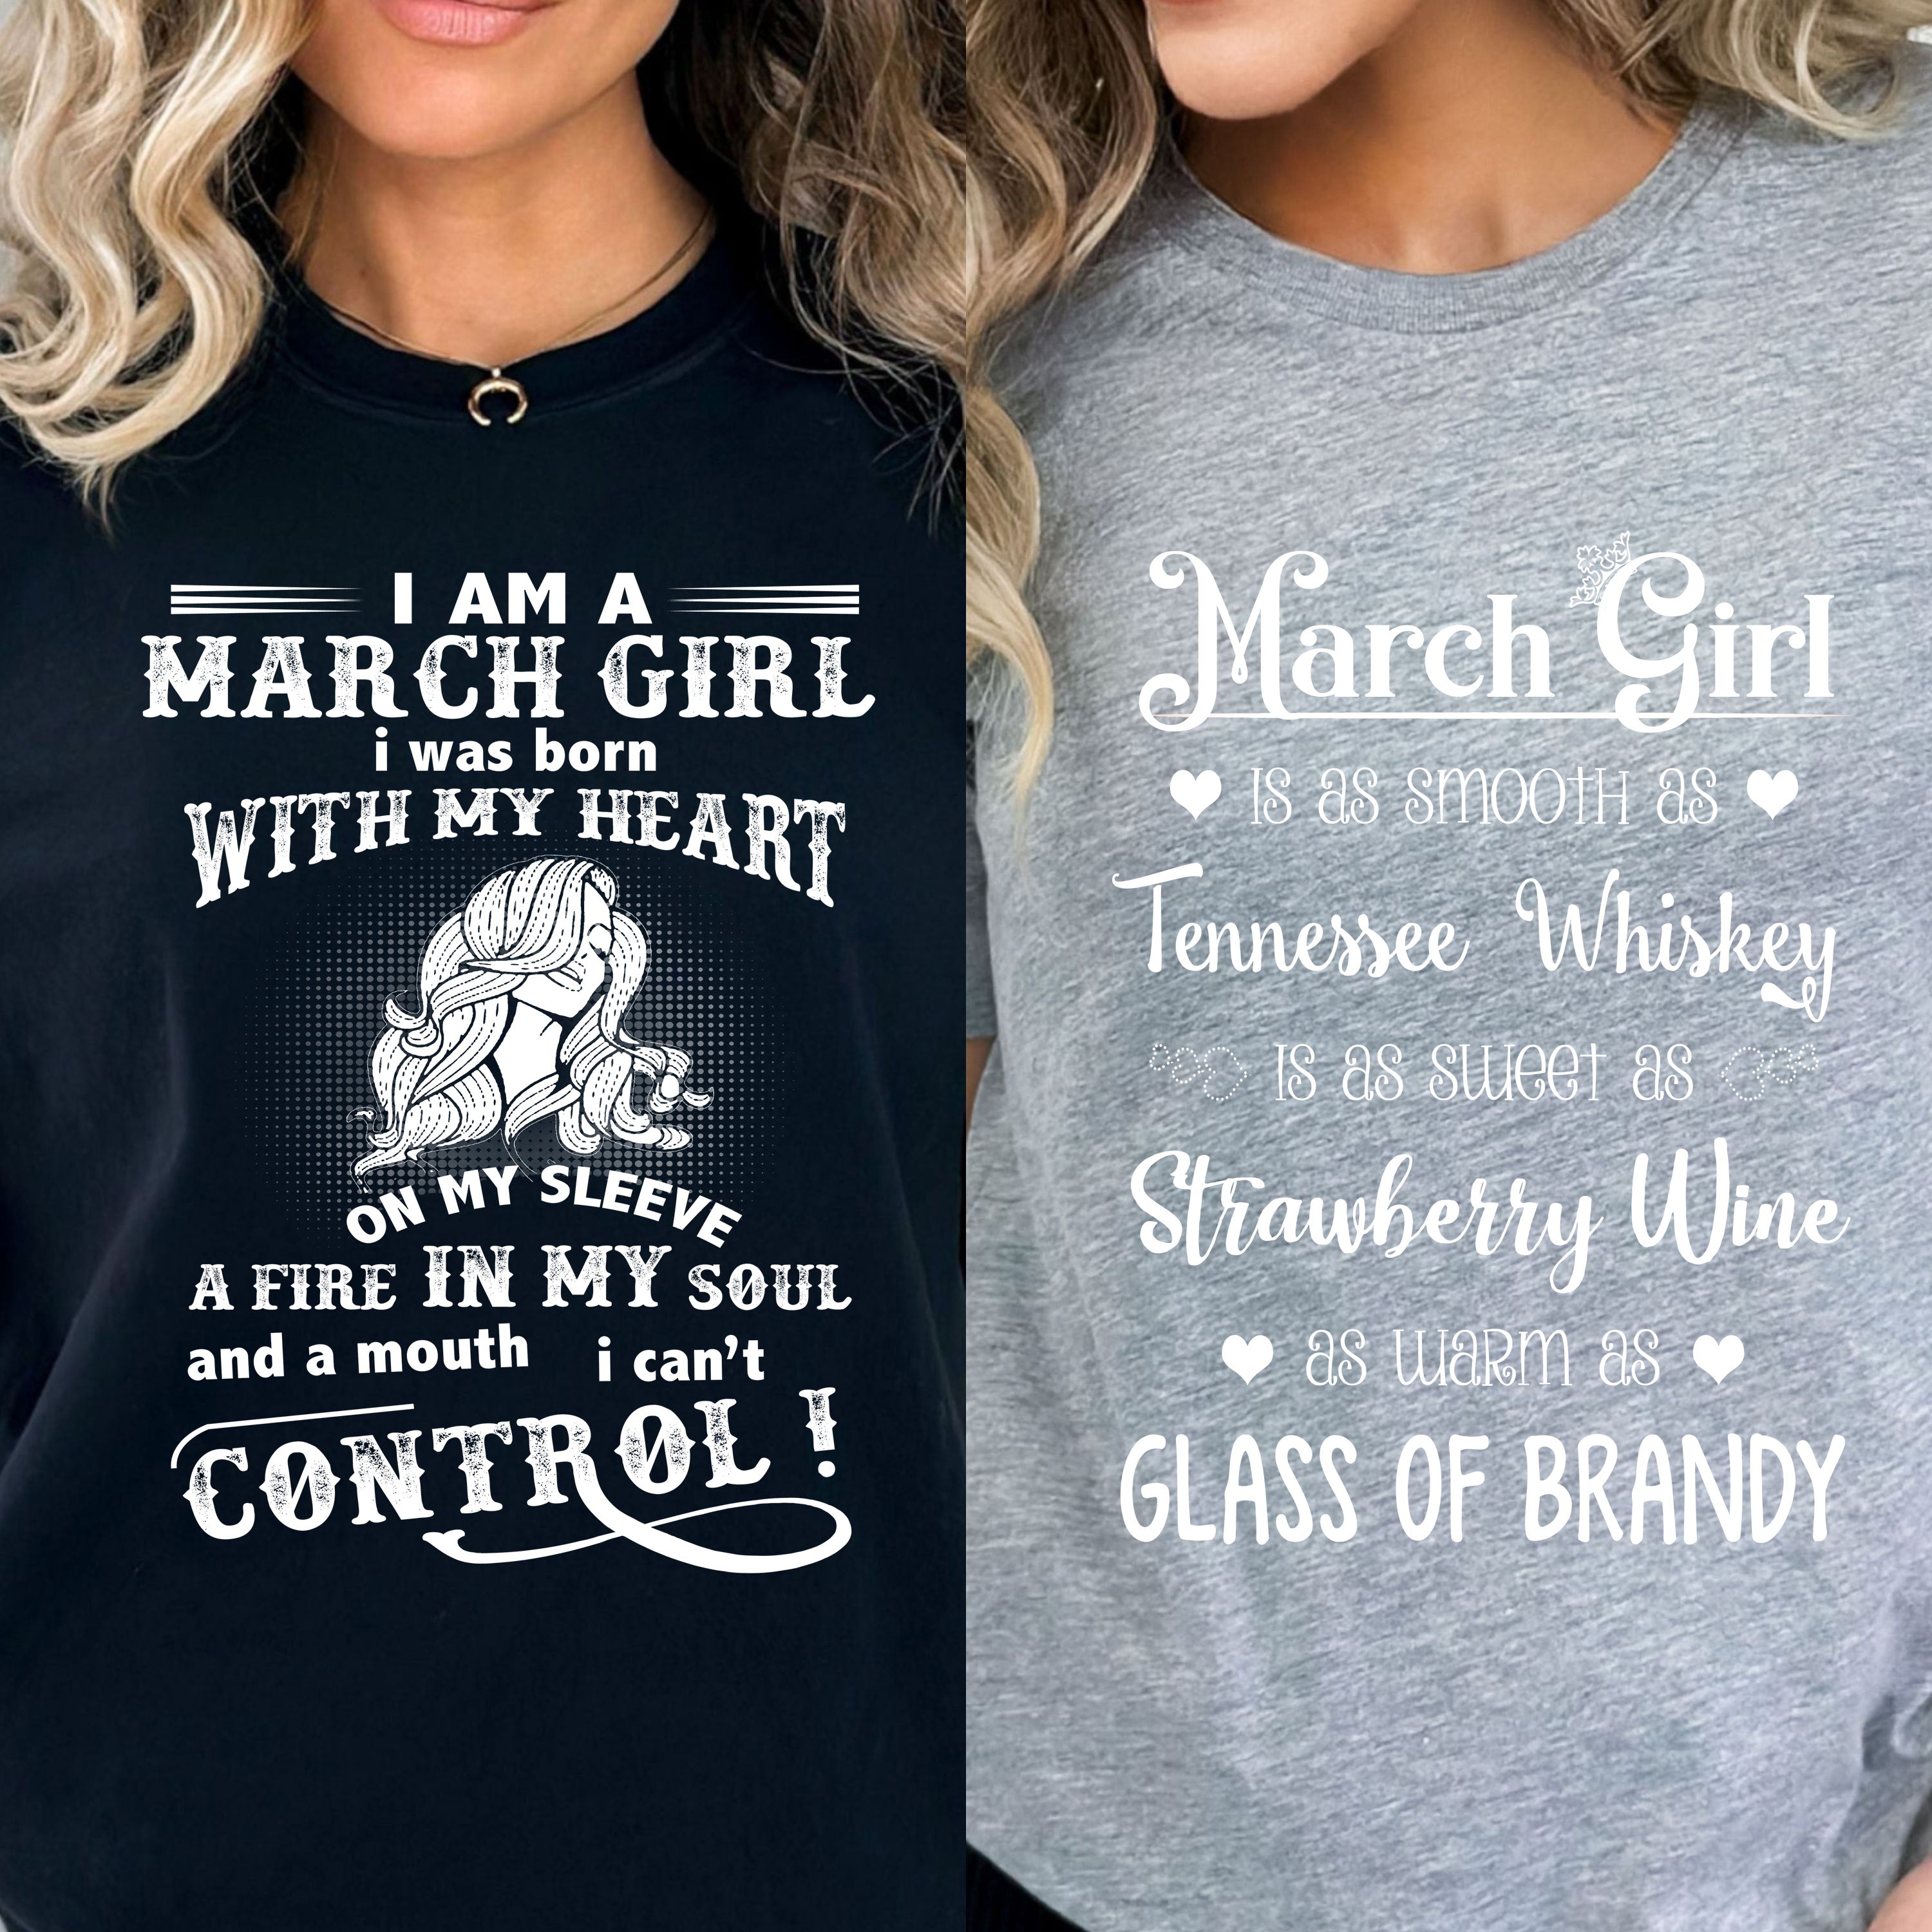 "March Whiskey + Control -Pack of 2".